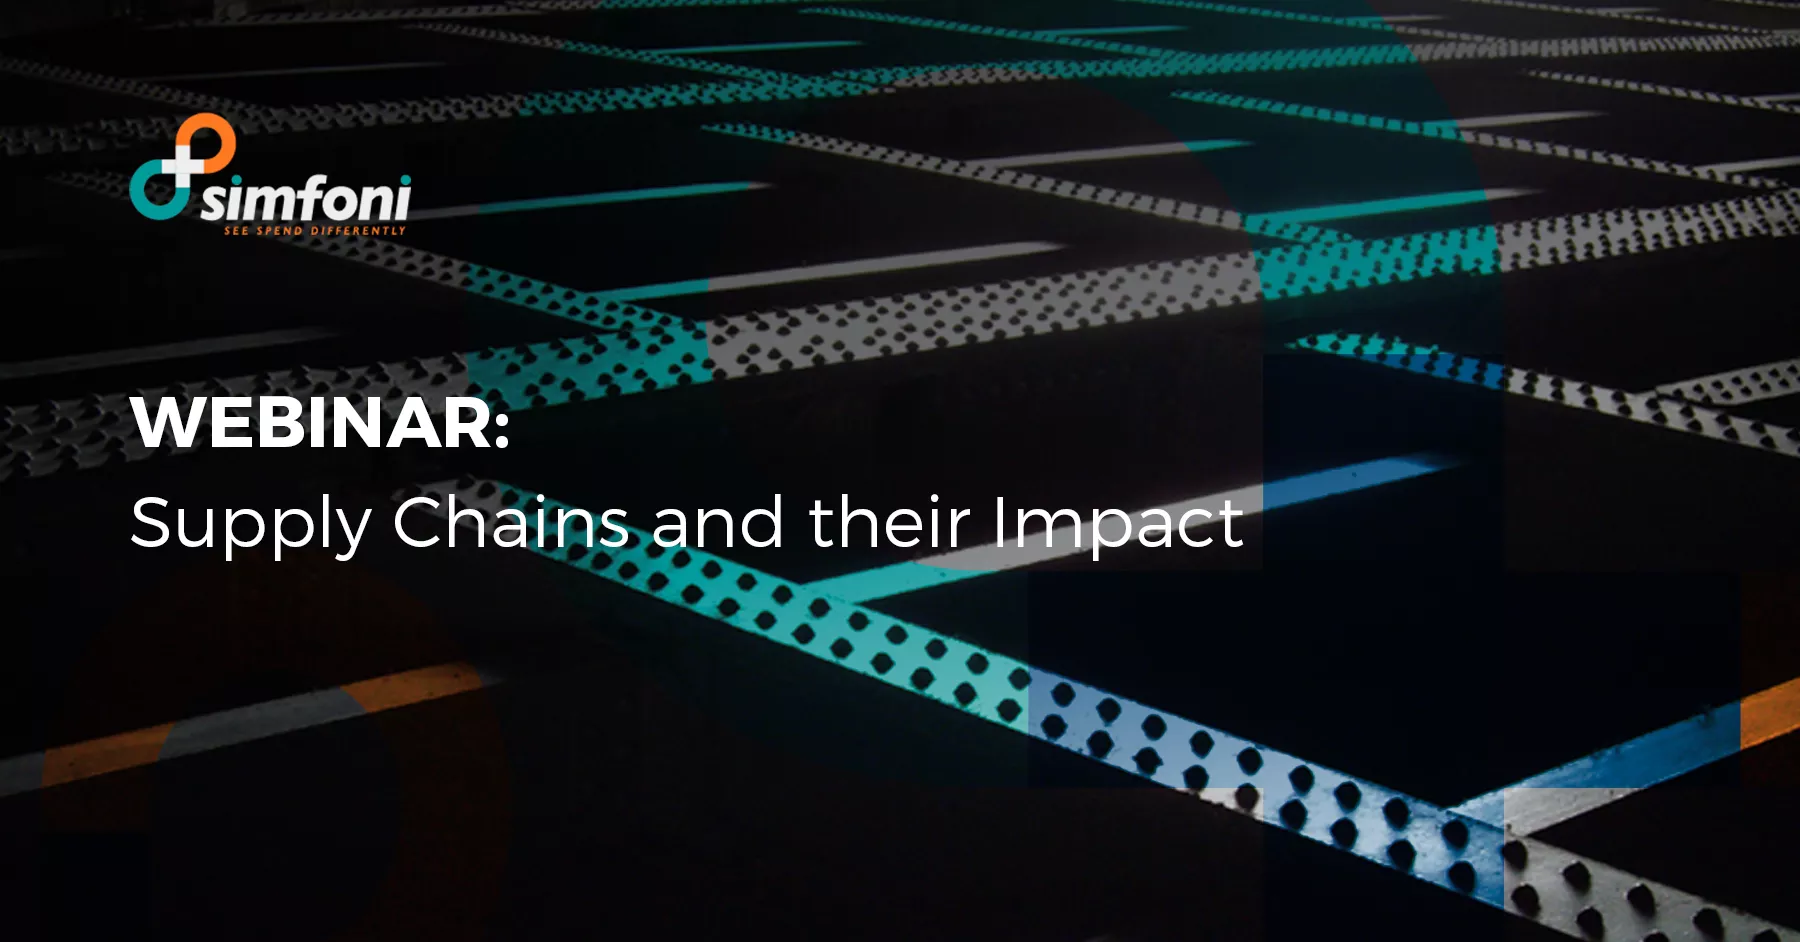 Webinar on Supply Chains and their Impact